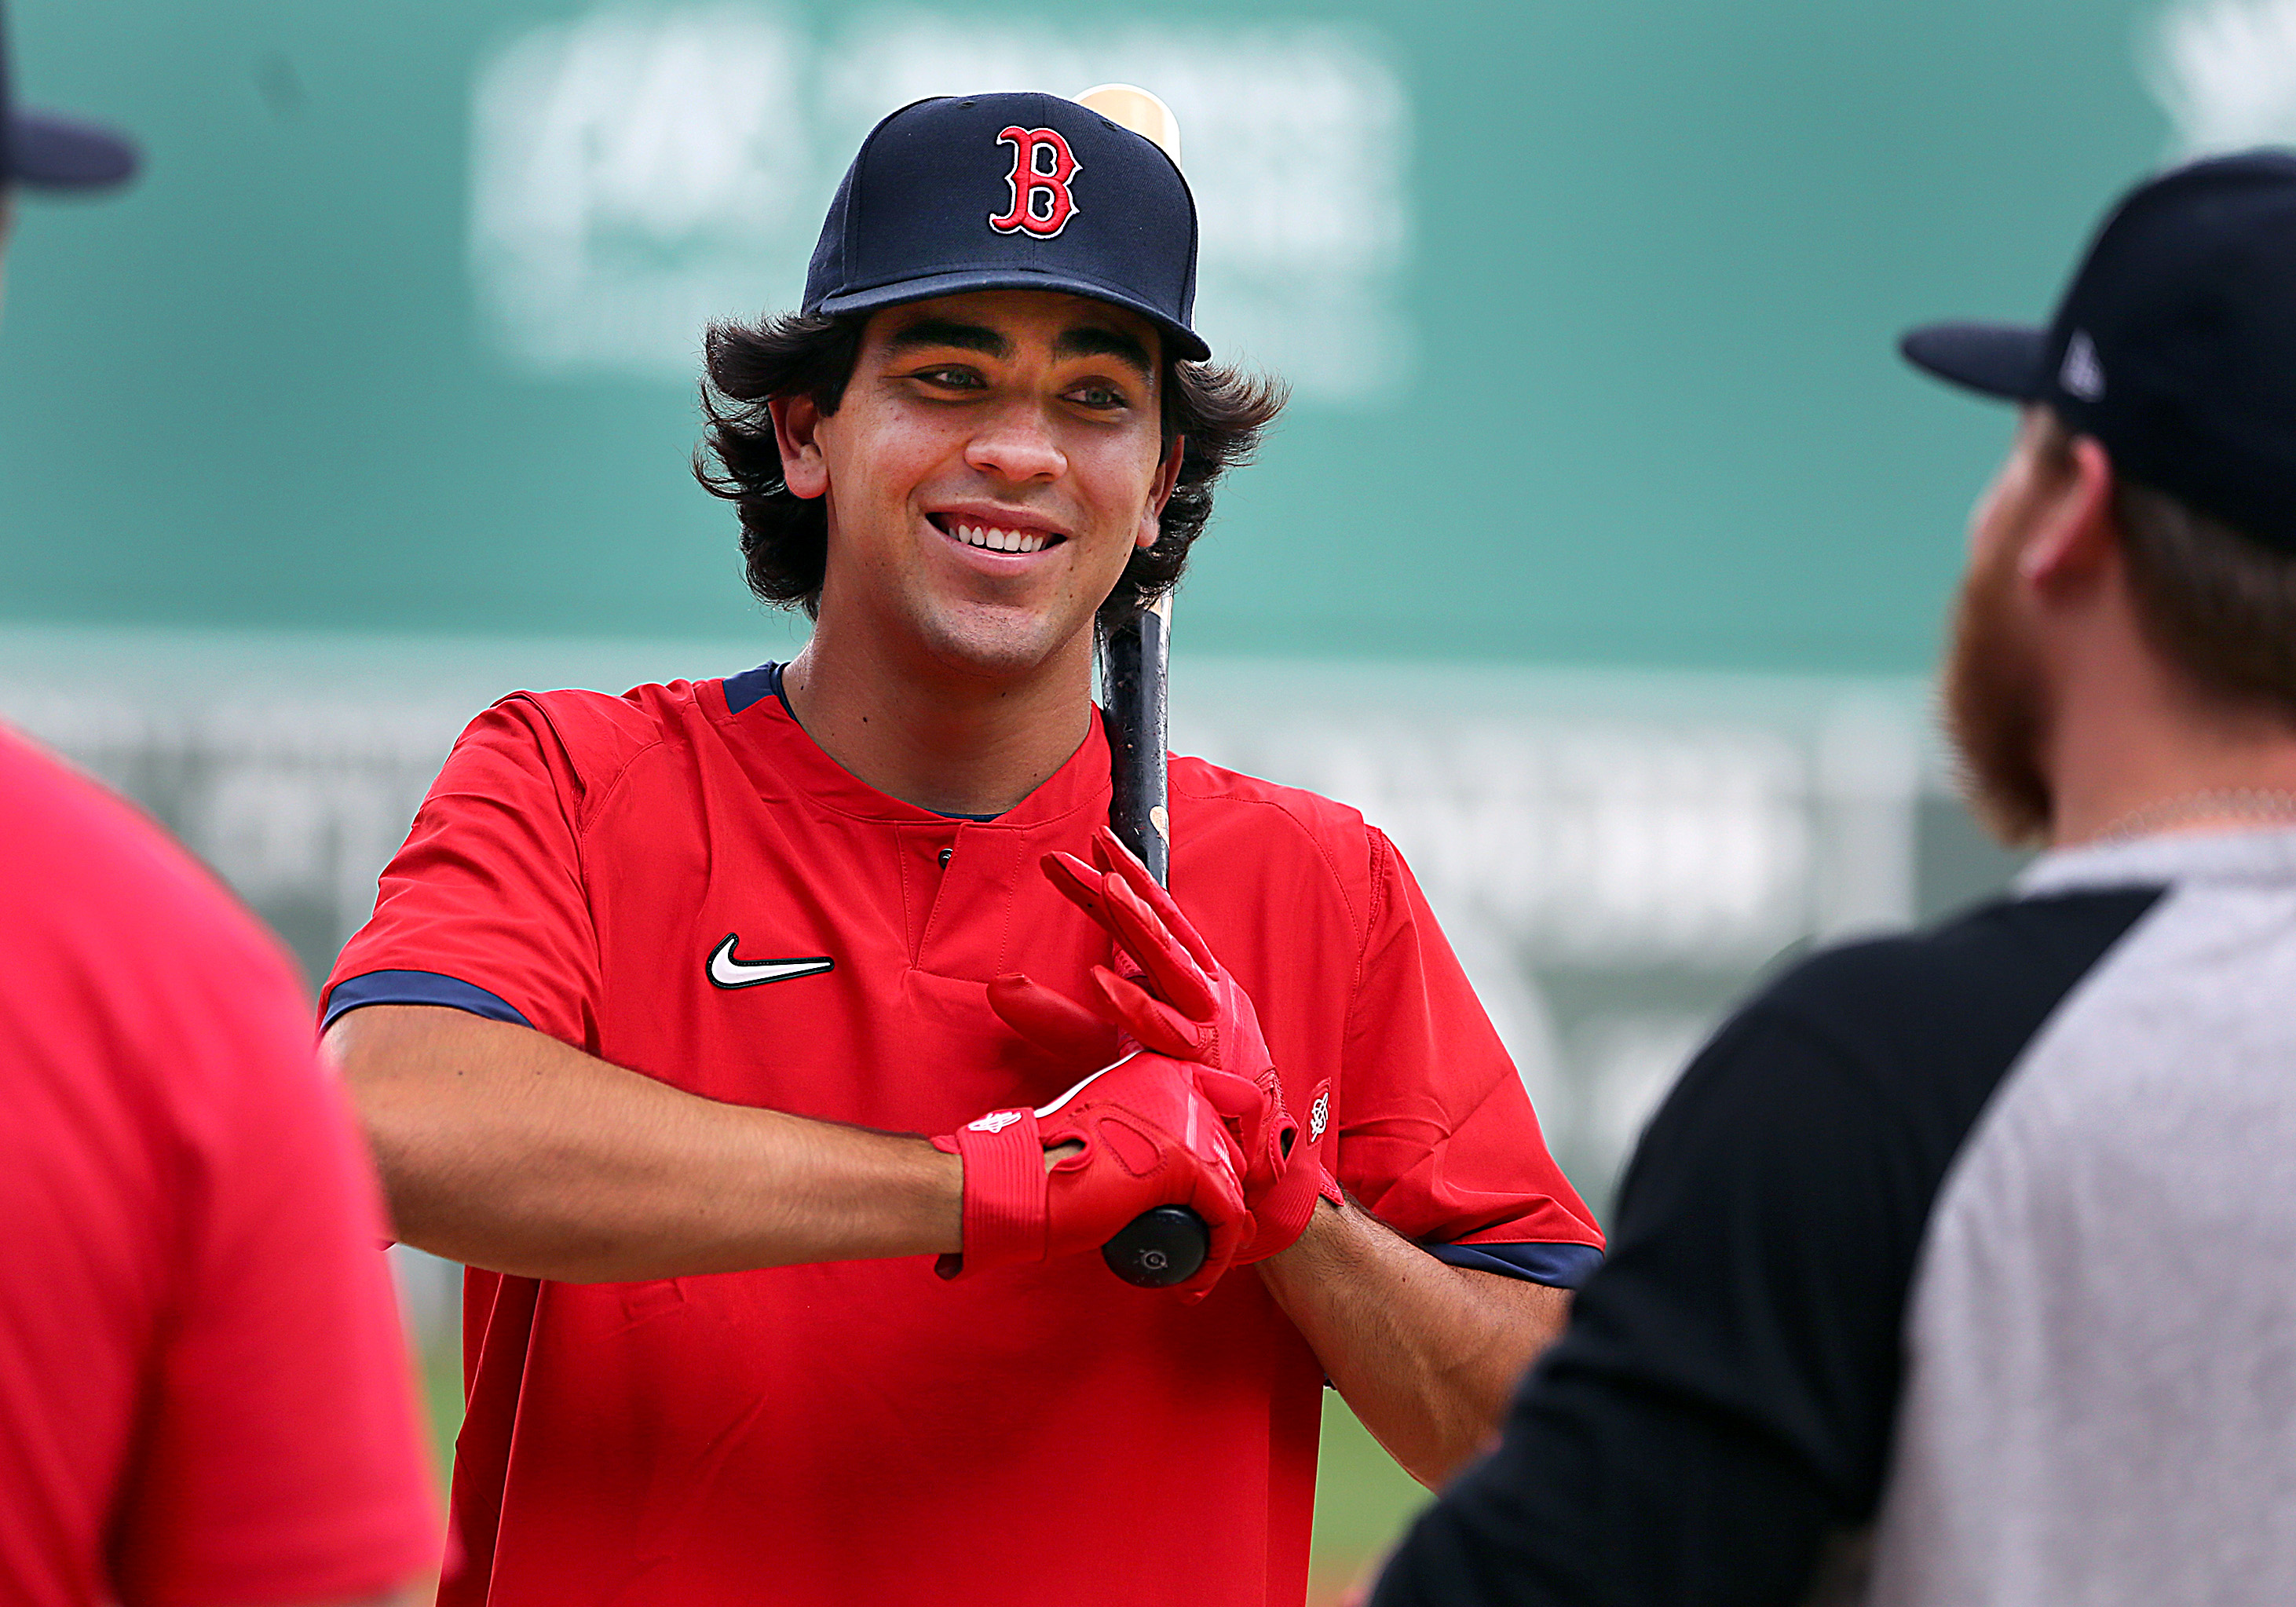 Dispatches from the back fields at Red Sox spring training: A